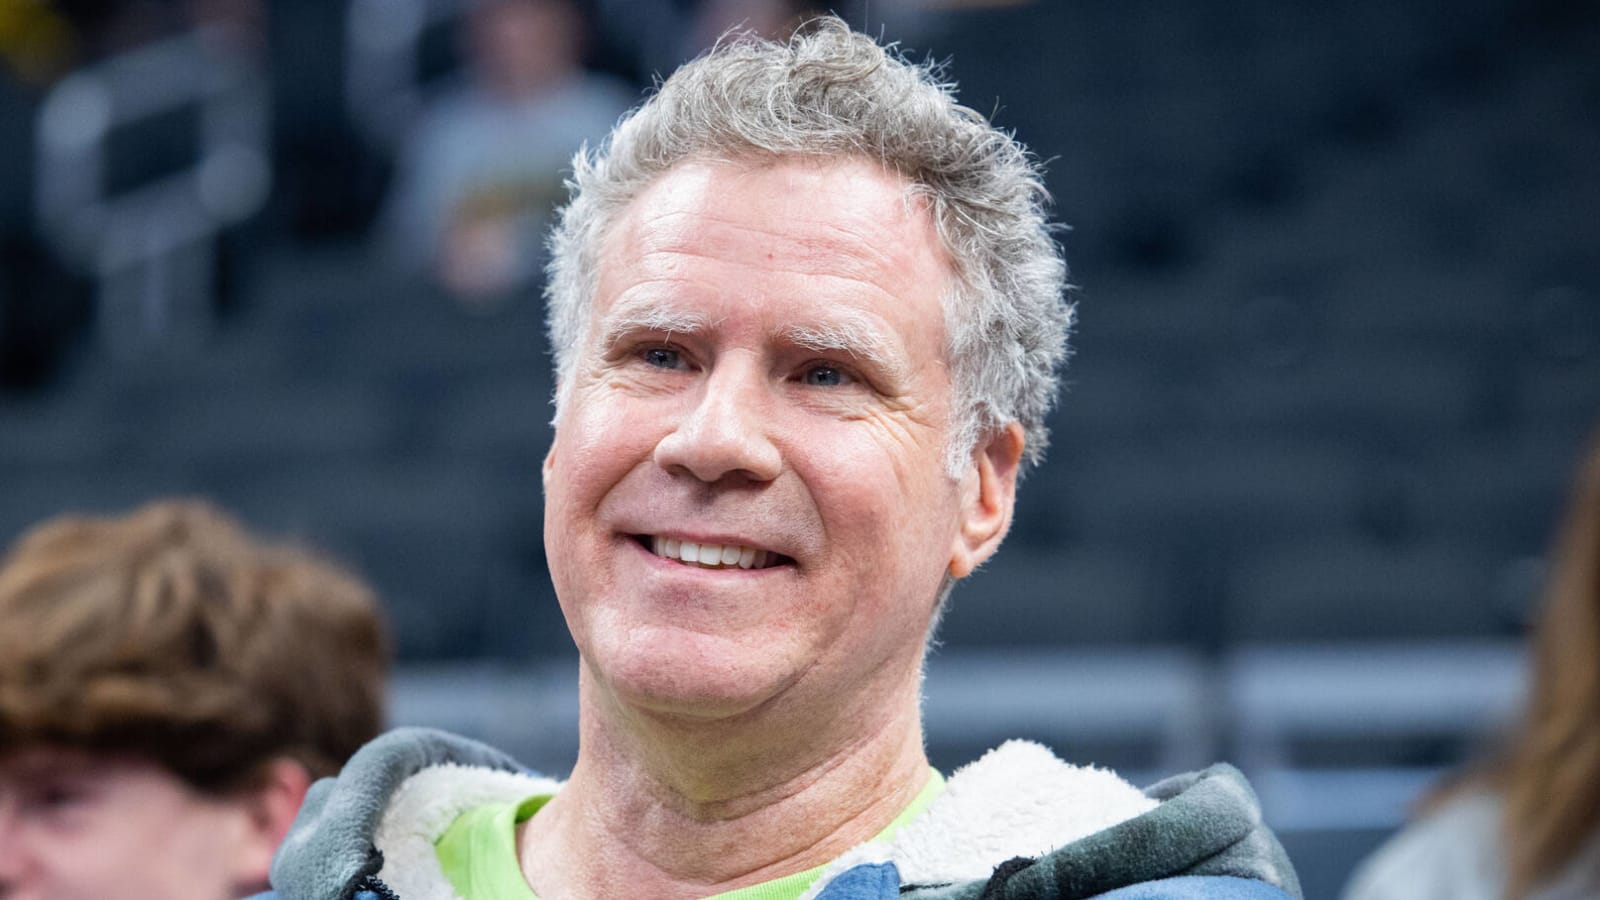 Report: Will Ferrell to star in golf comedy series